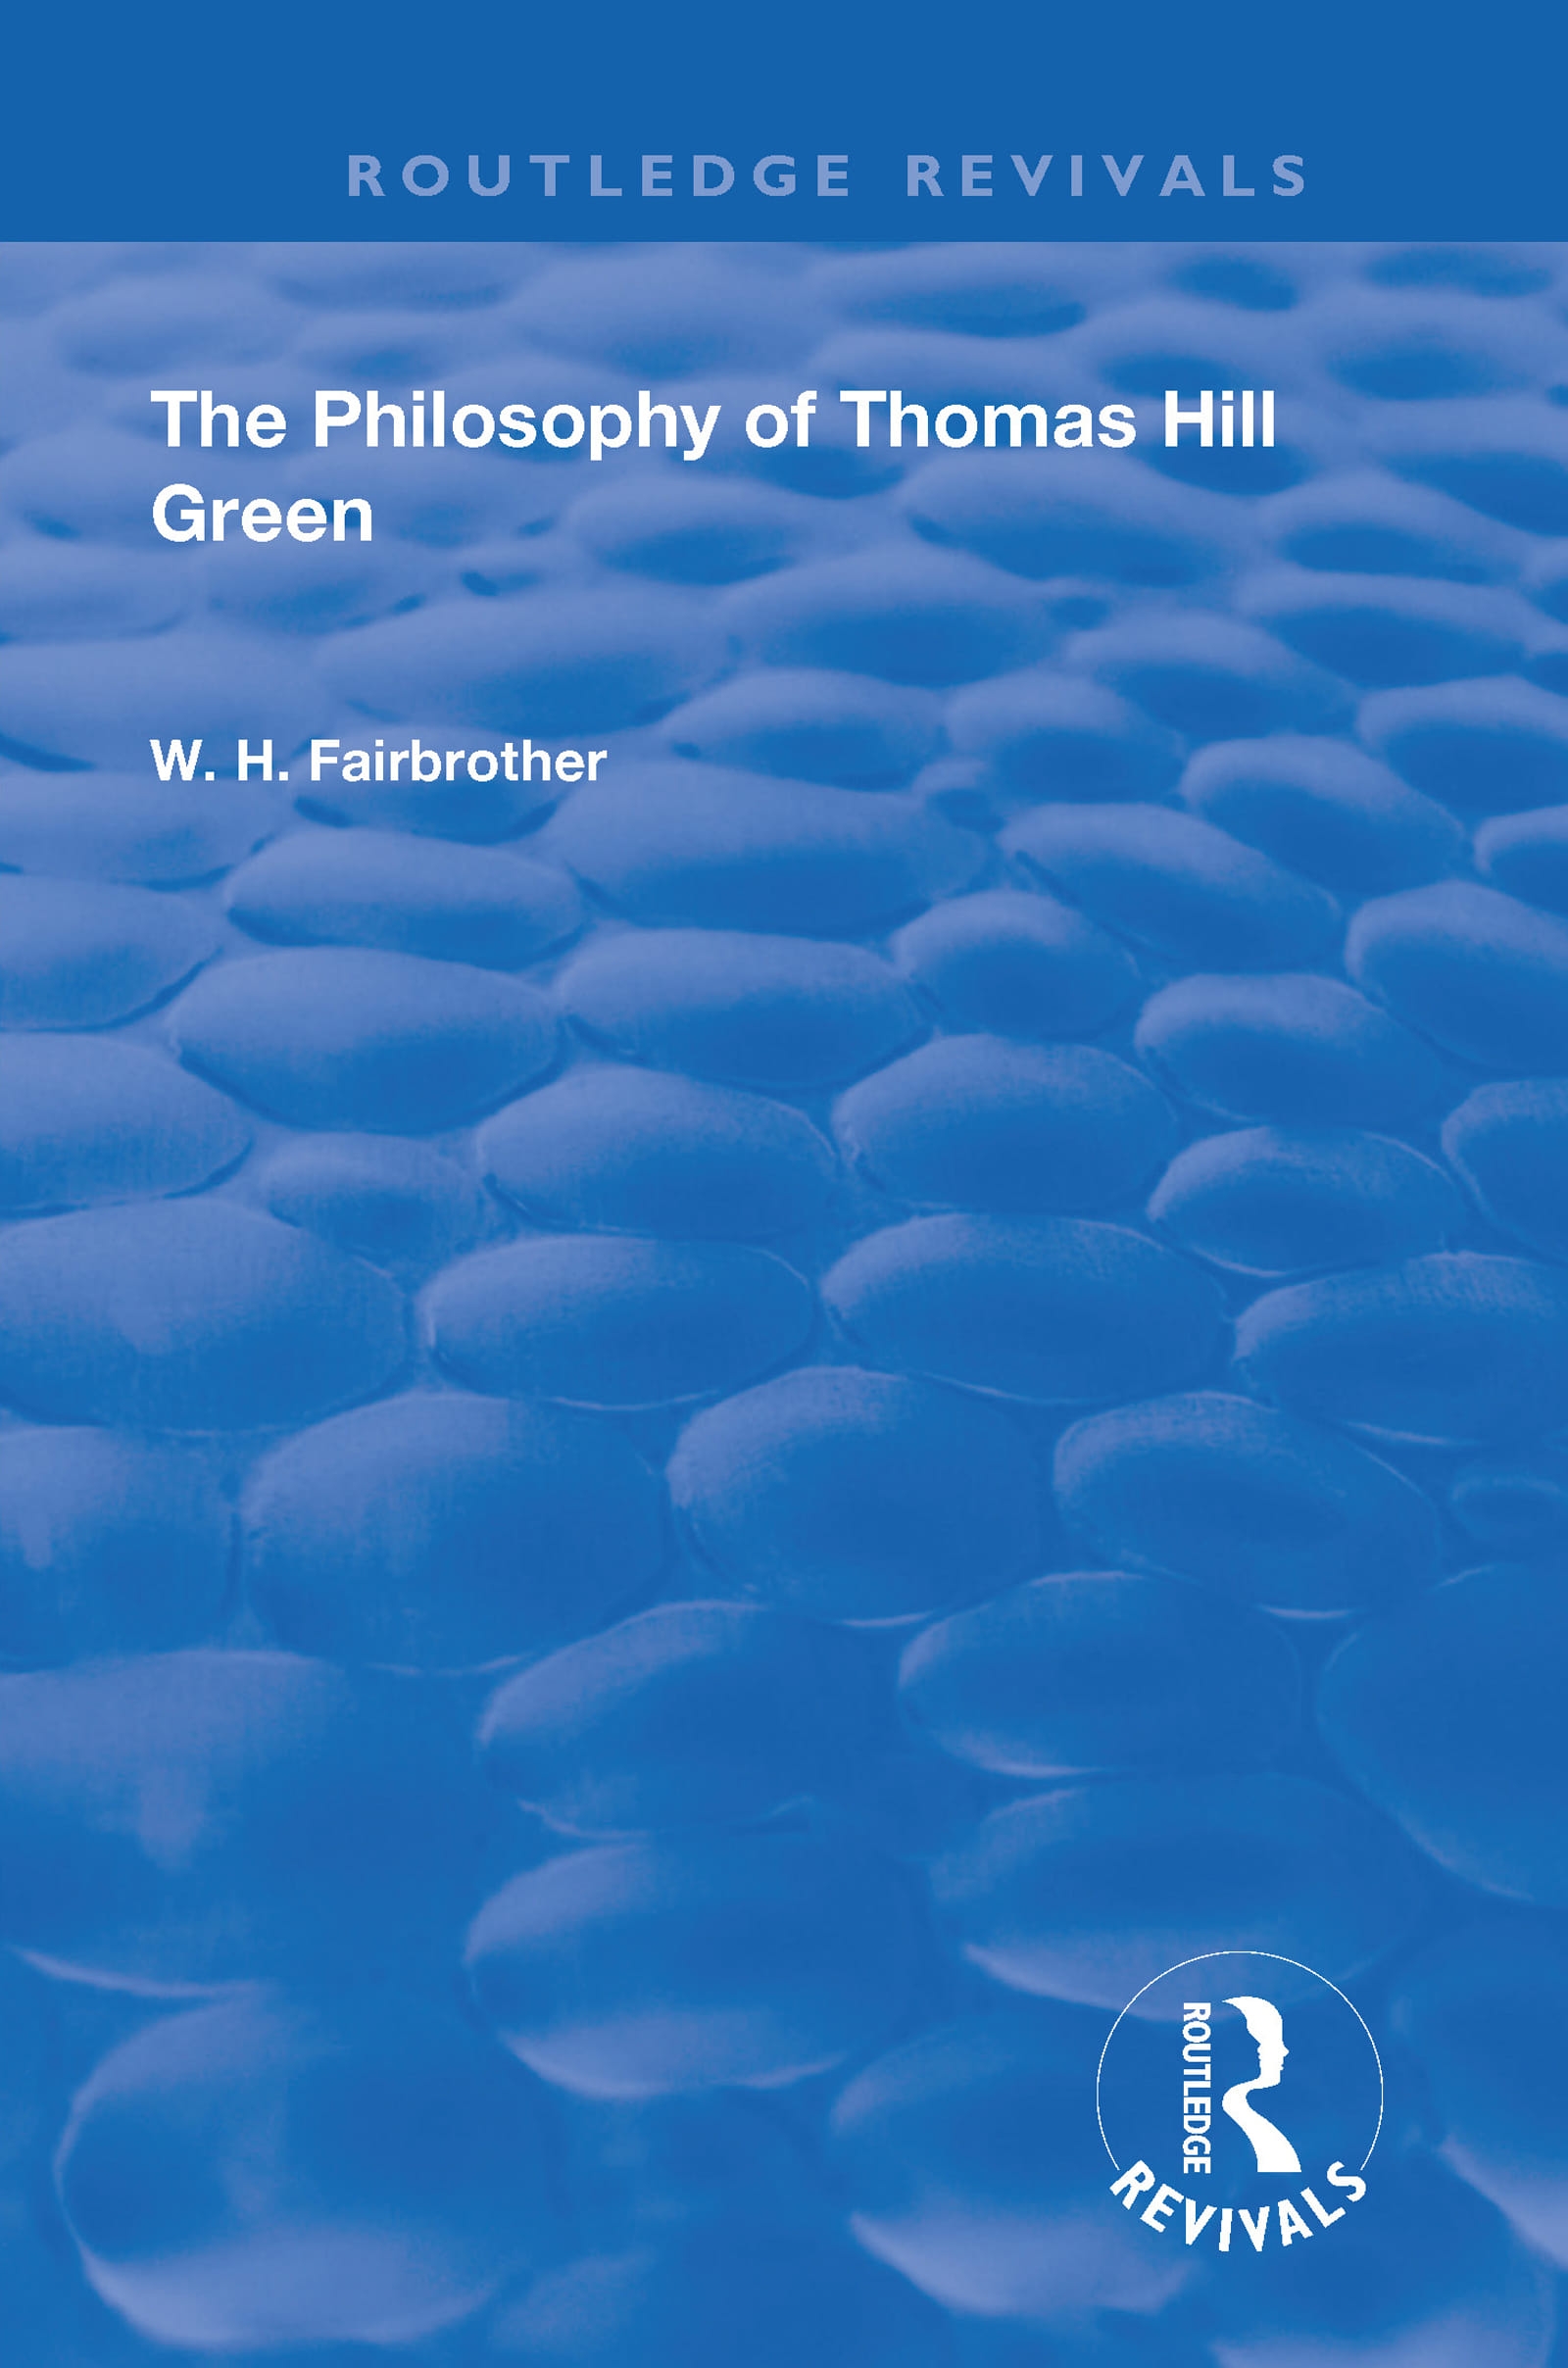 The Philosophy of Thomas Hill Green